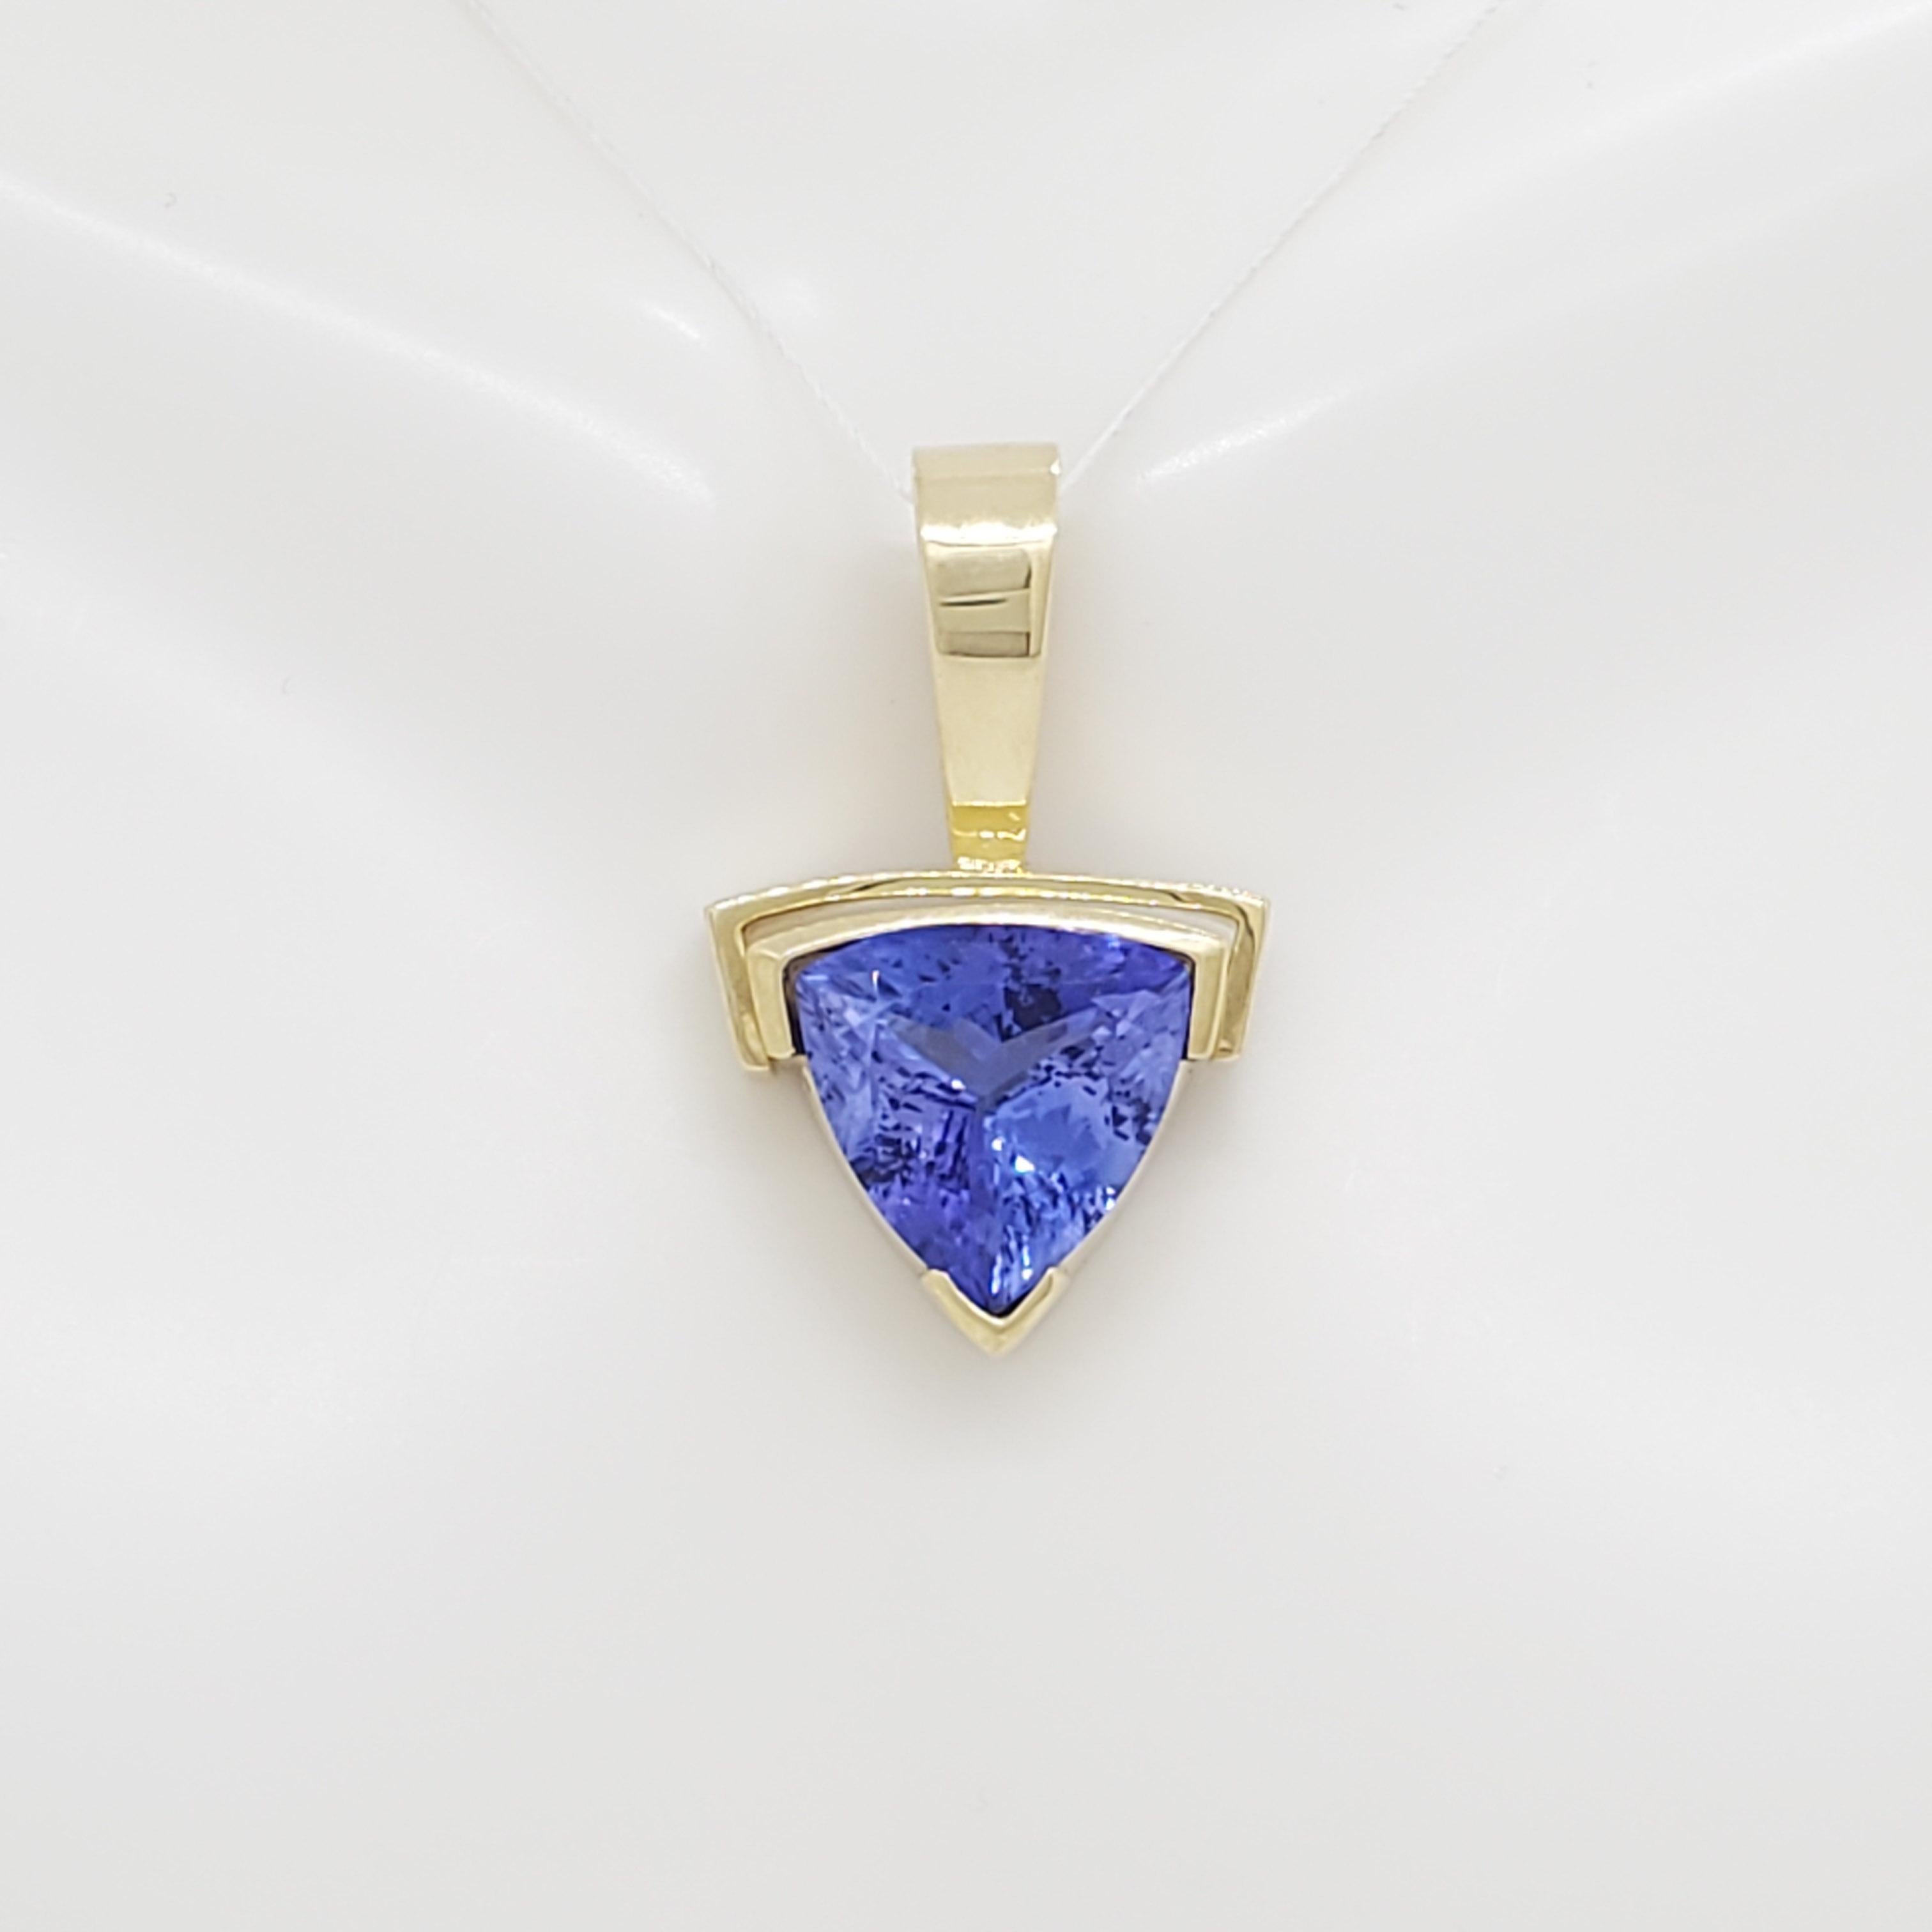 Gorgeous 8.14 ct. tanzanite trillion pendant handmade in 14k yellow gold.  Quality of tanzanite is excellent and size is substantial.